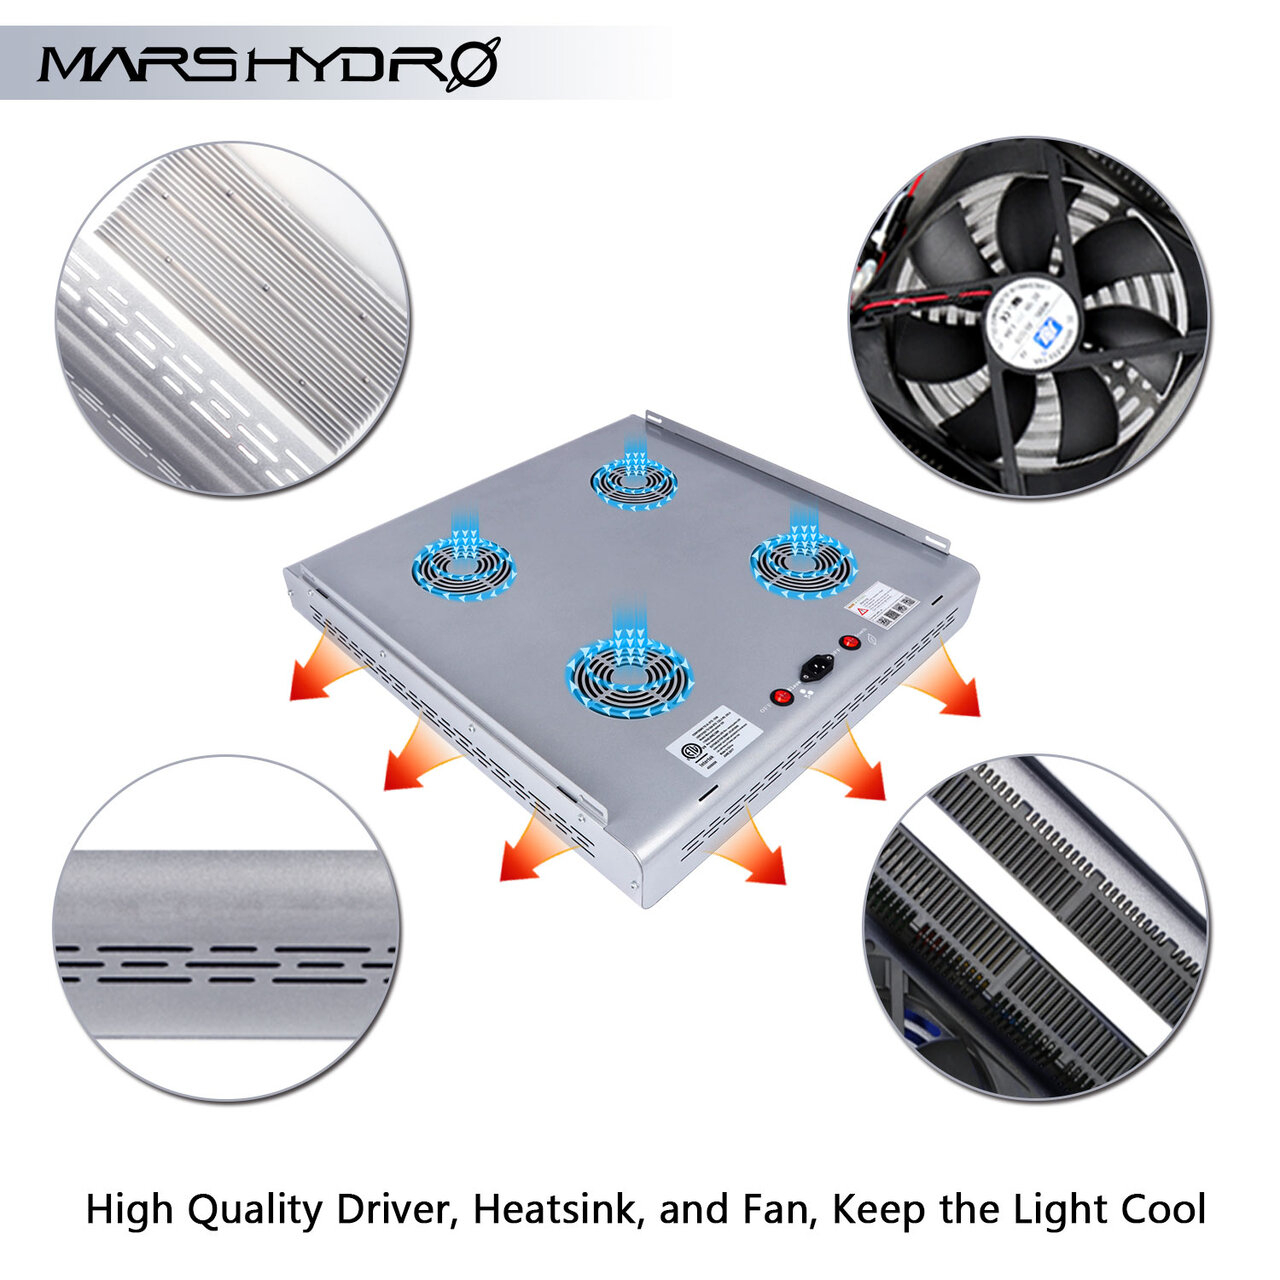 Mars Pro II 160 cooling system